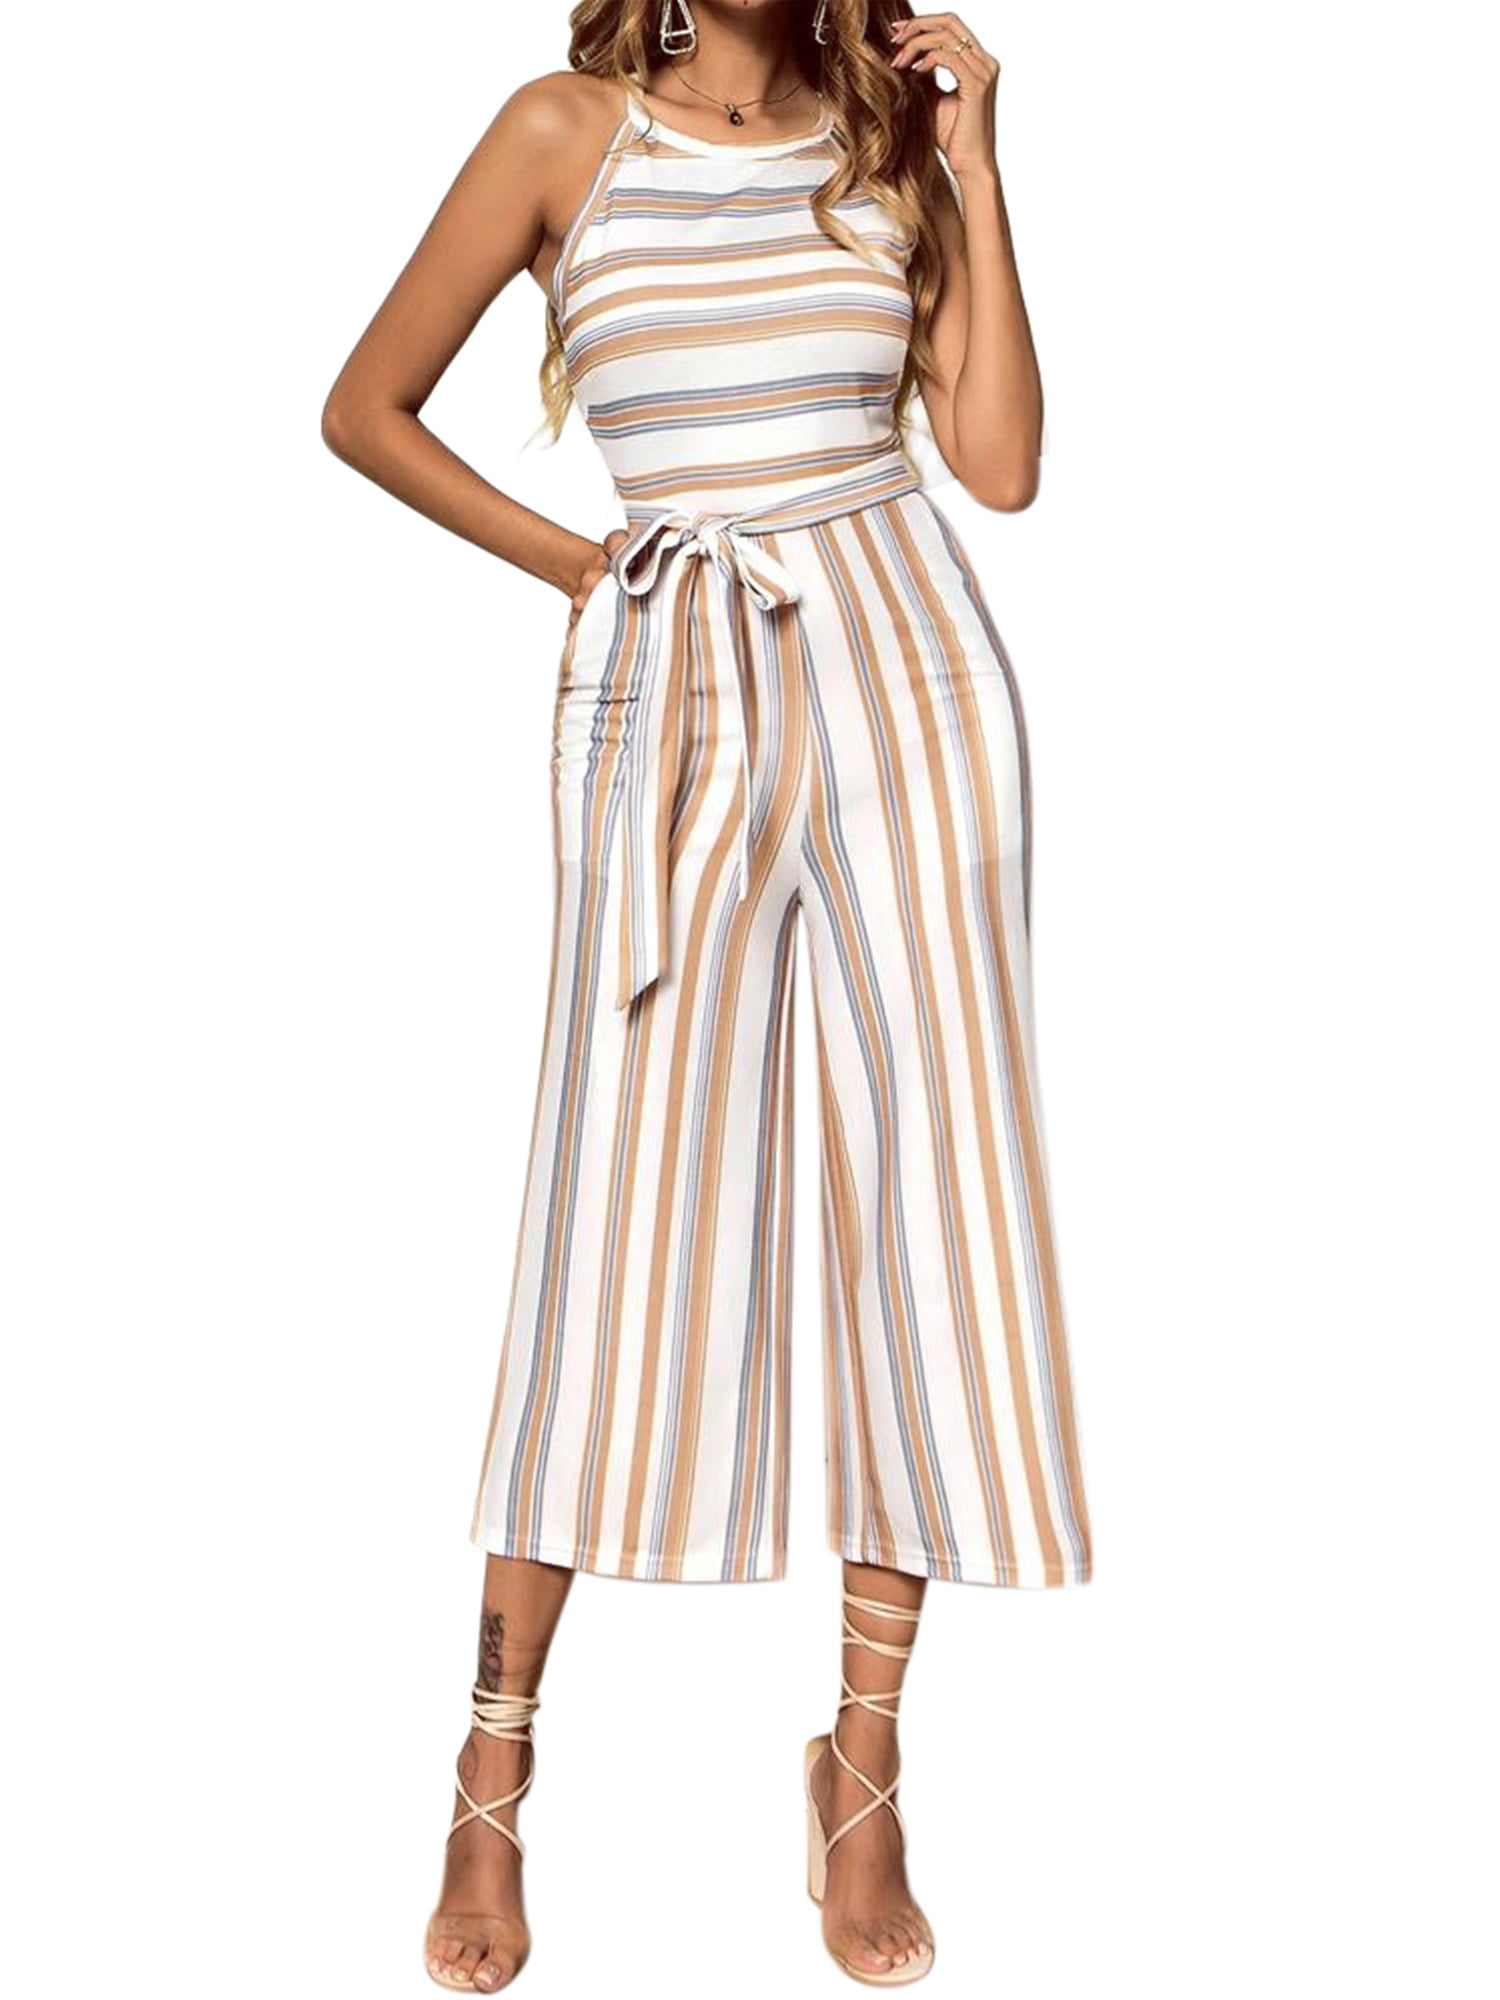 KILIG Women V Neck Tie Front Long Sleeves Wide Leg Long Pants Striped Casual Jumpsuit Romper with Pockets 